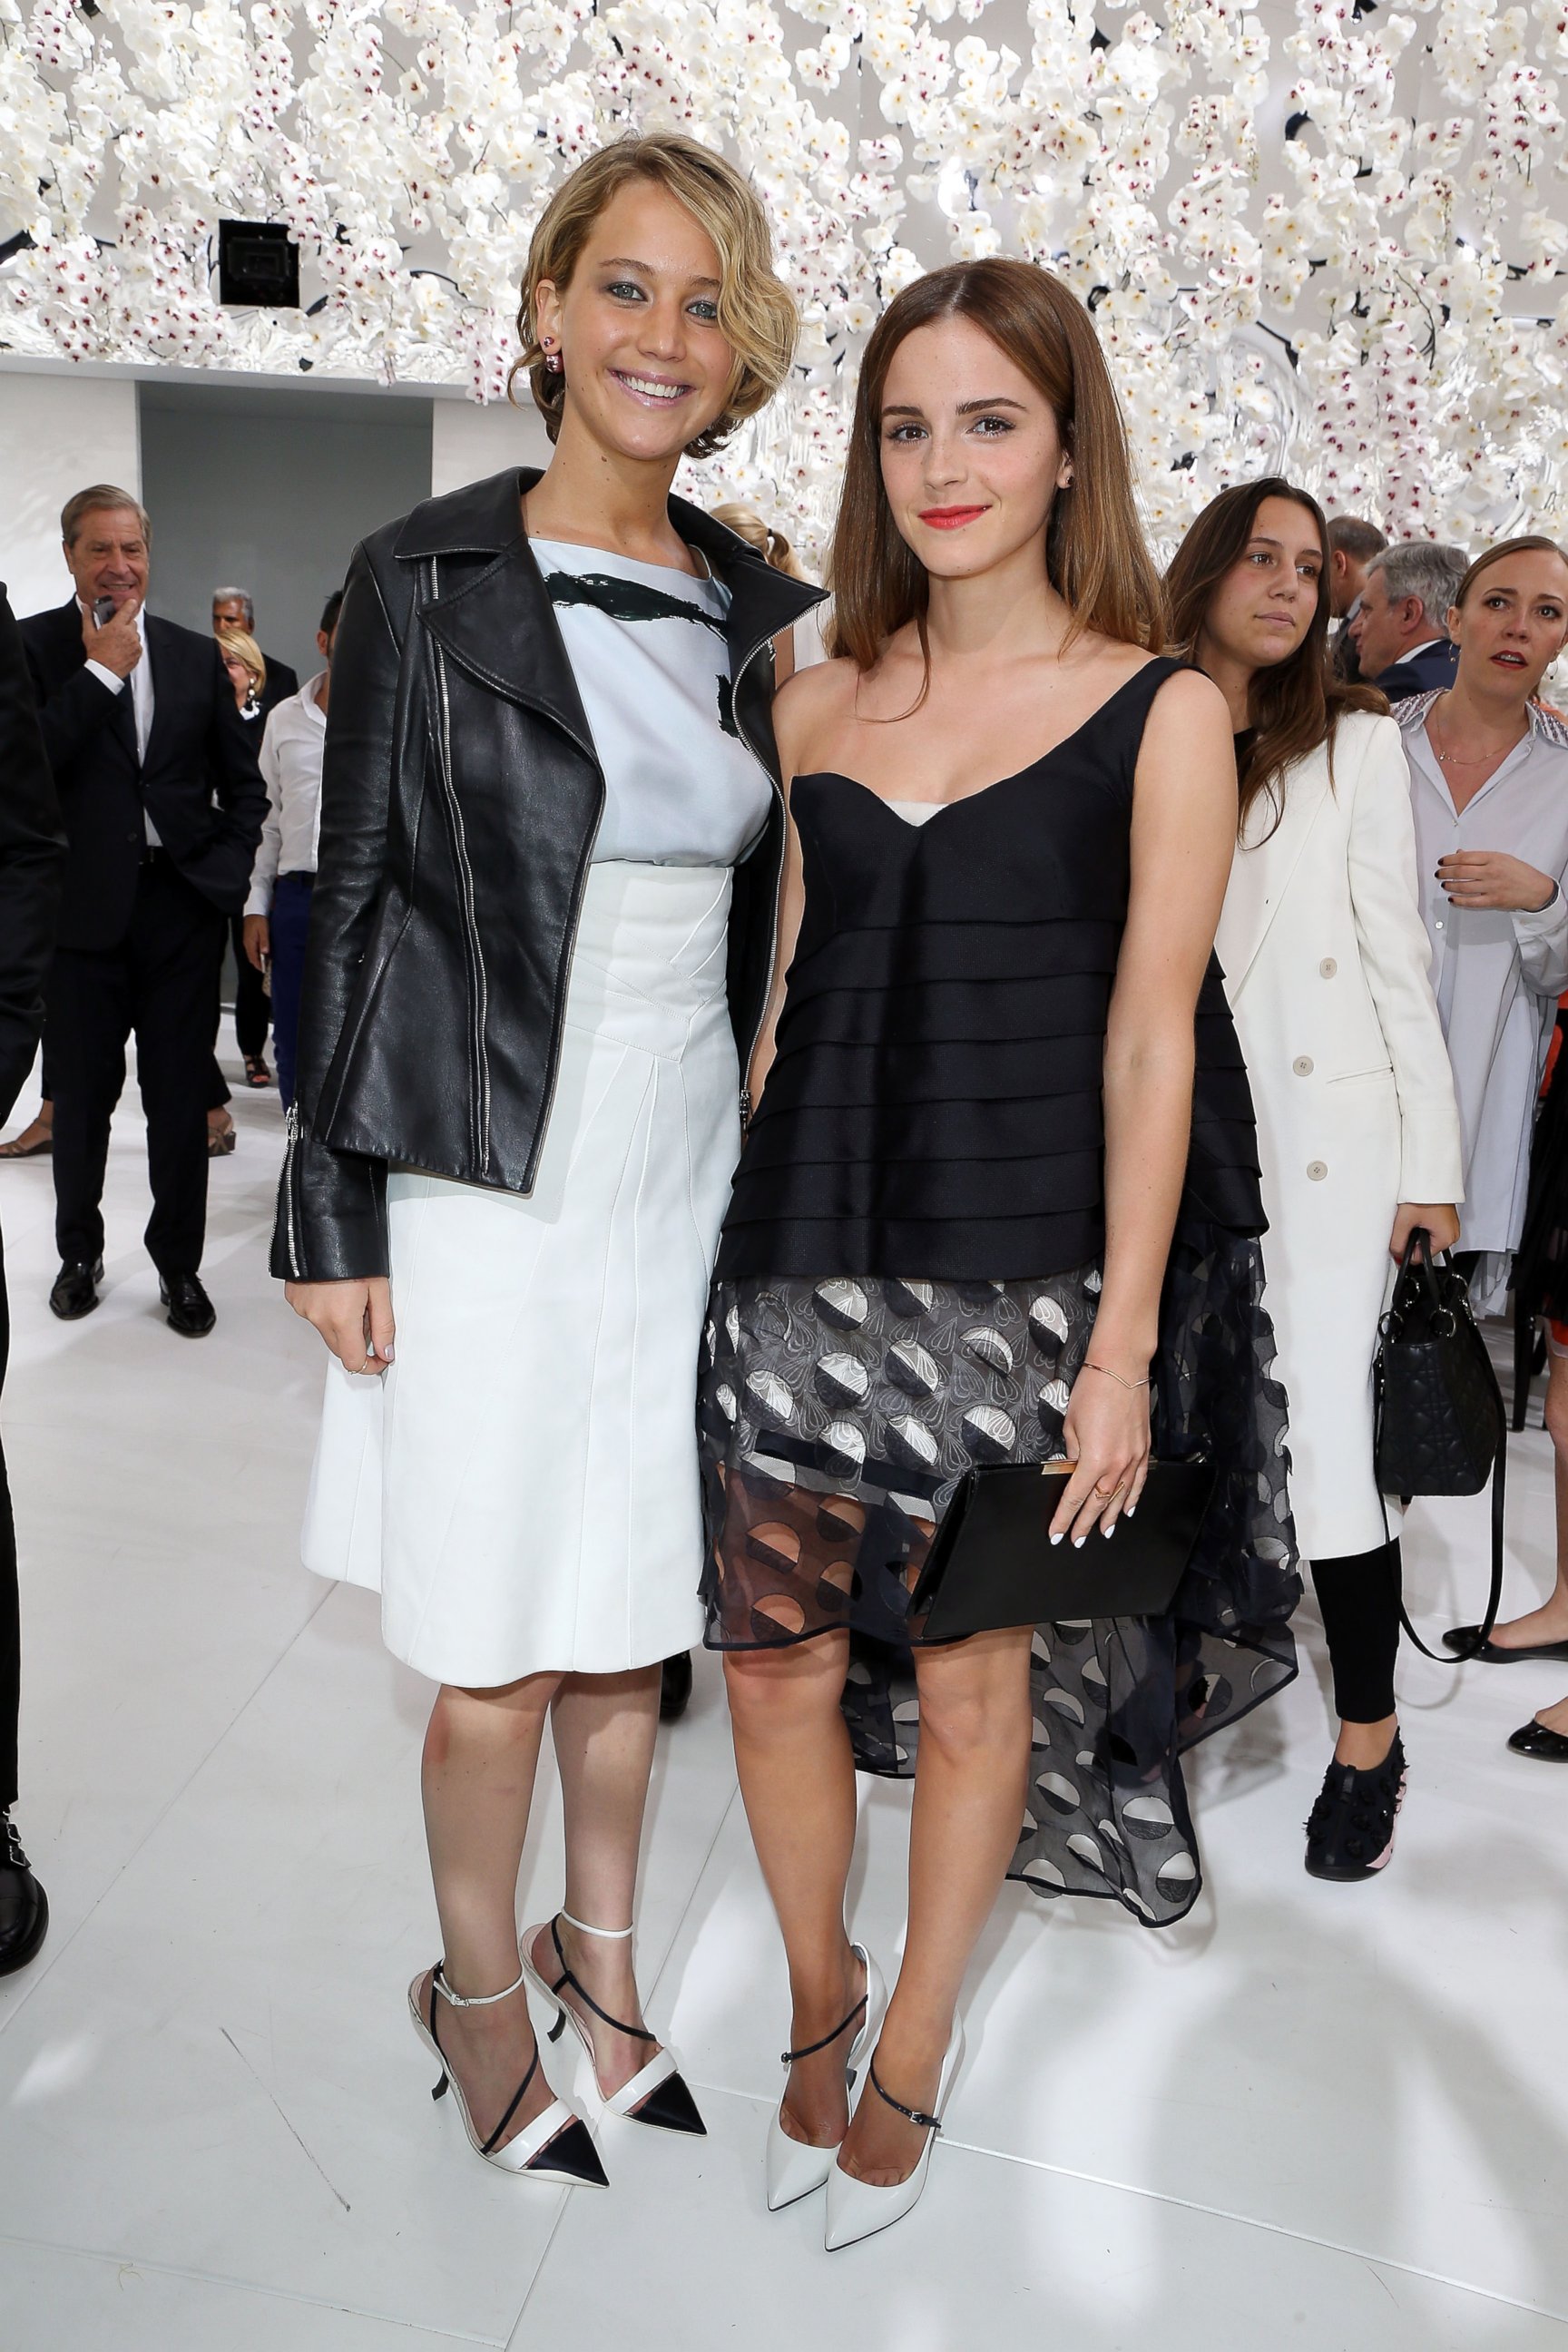 PHOTO: Jennifer Lawrence and Emma Watson attend the Christian Dior show as part of Paris Fashion Week - Haute Couture Fall/Winter 2014-2015 at Muse Rodin. July 7, 2014, in Paris.